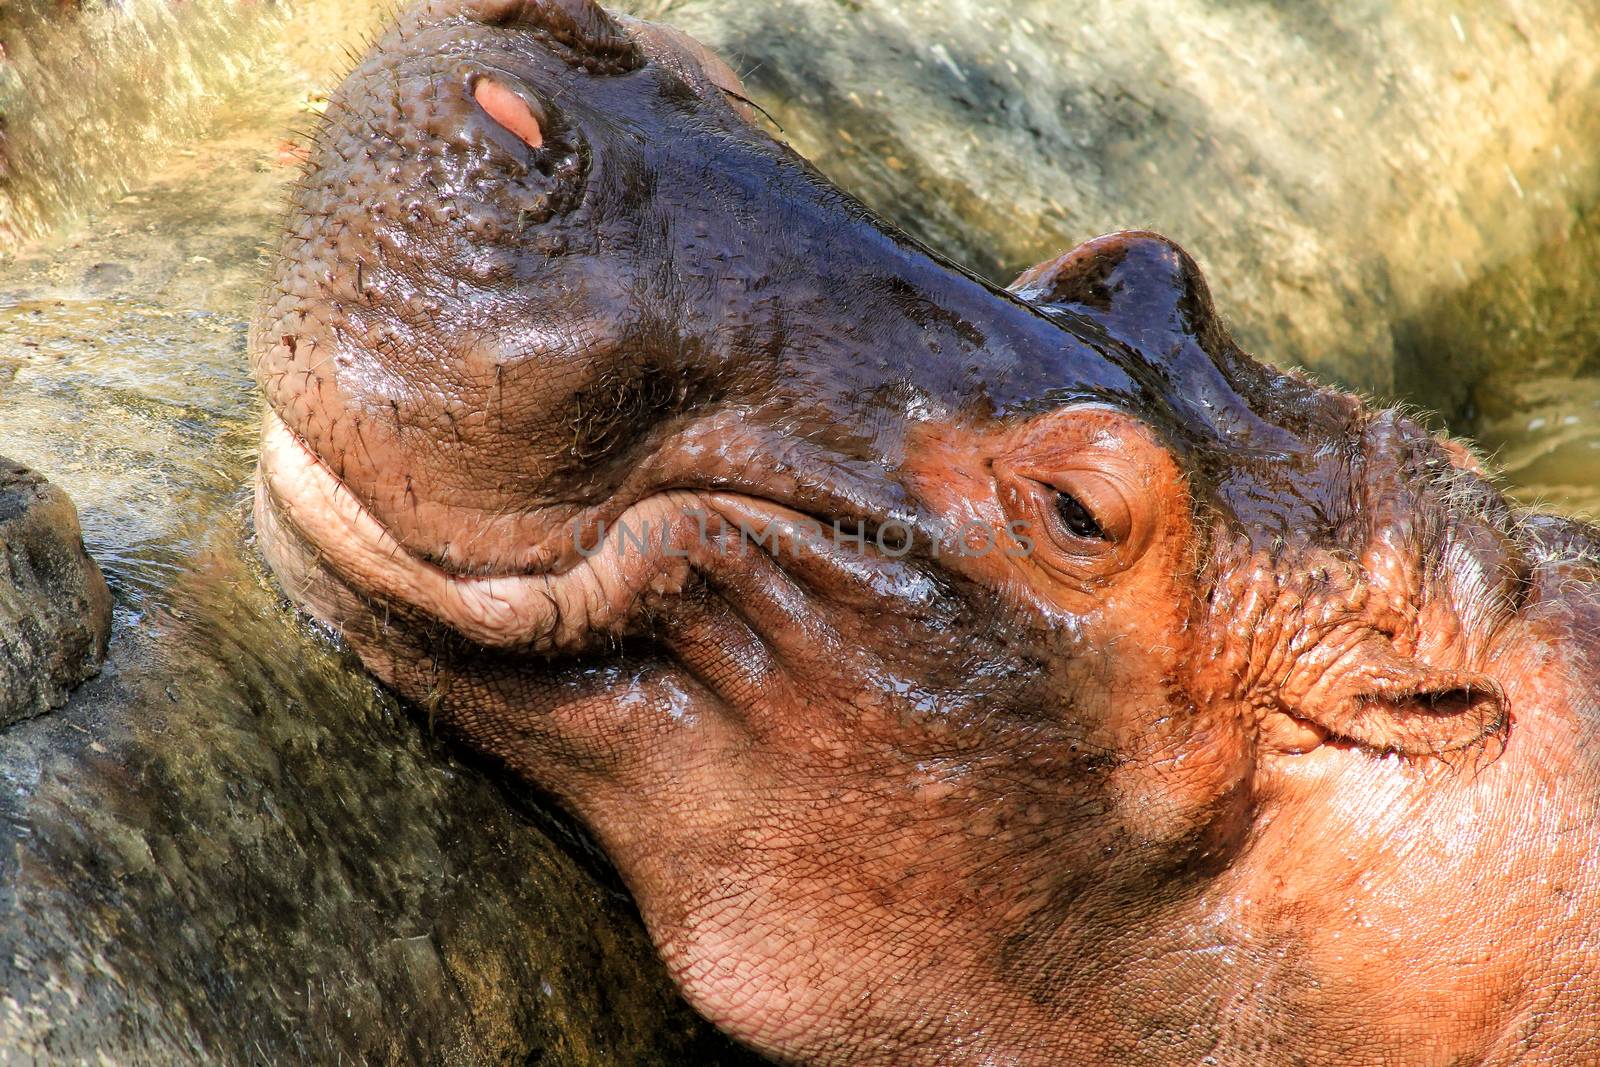 Hippopotamus head just above water, showing big eye and hairs on by friday